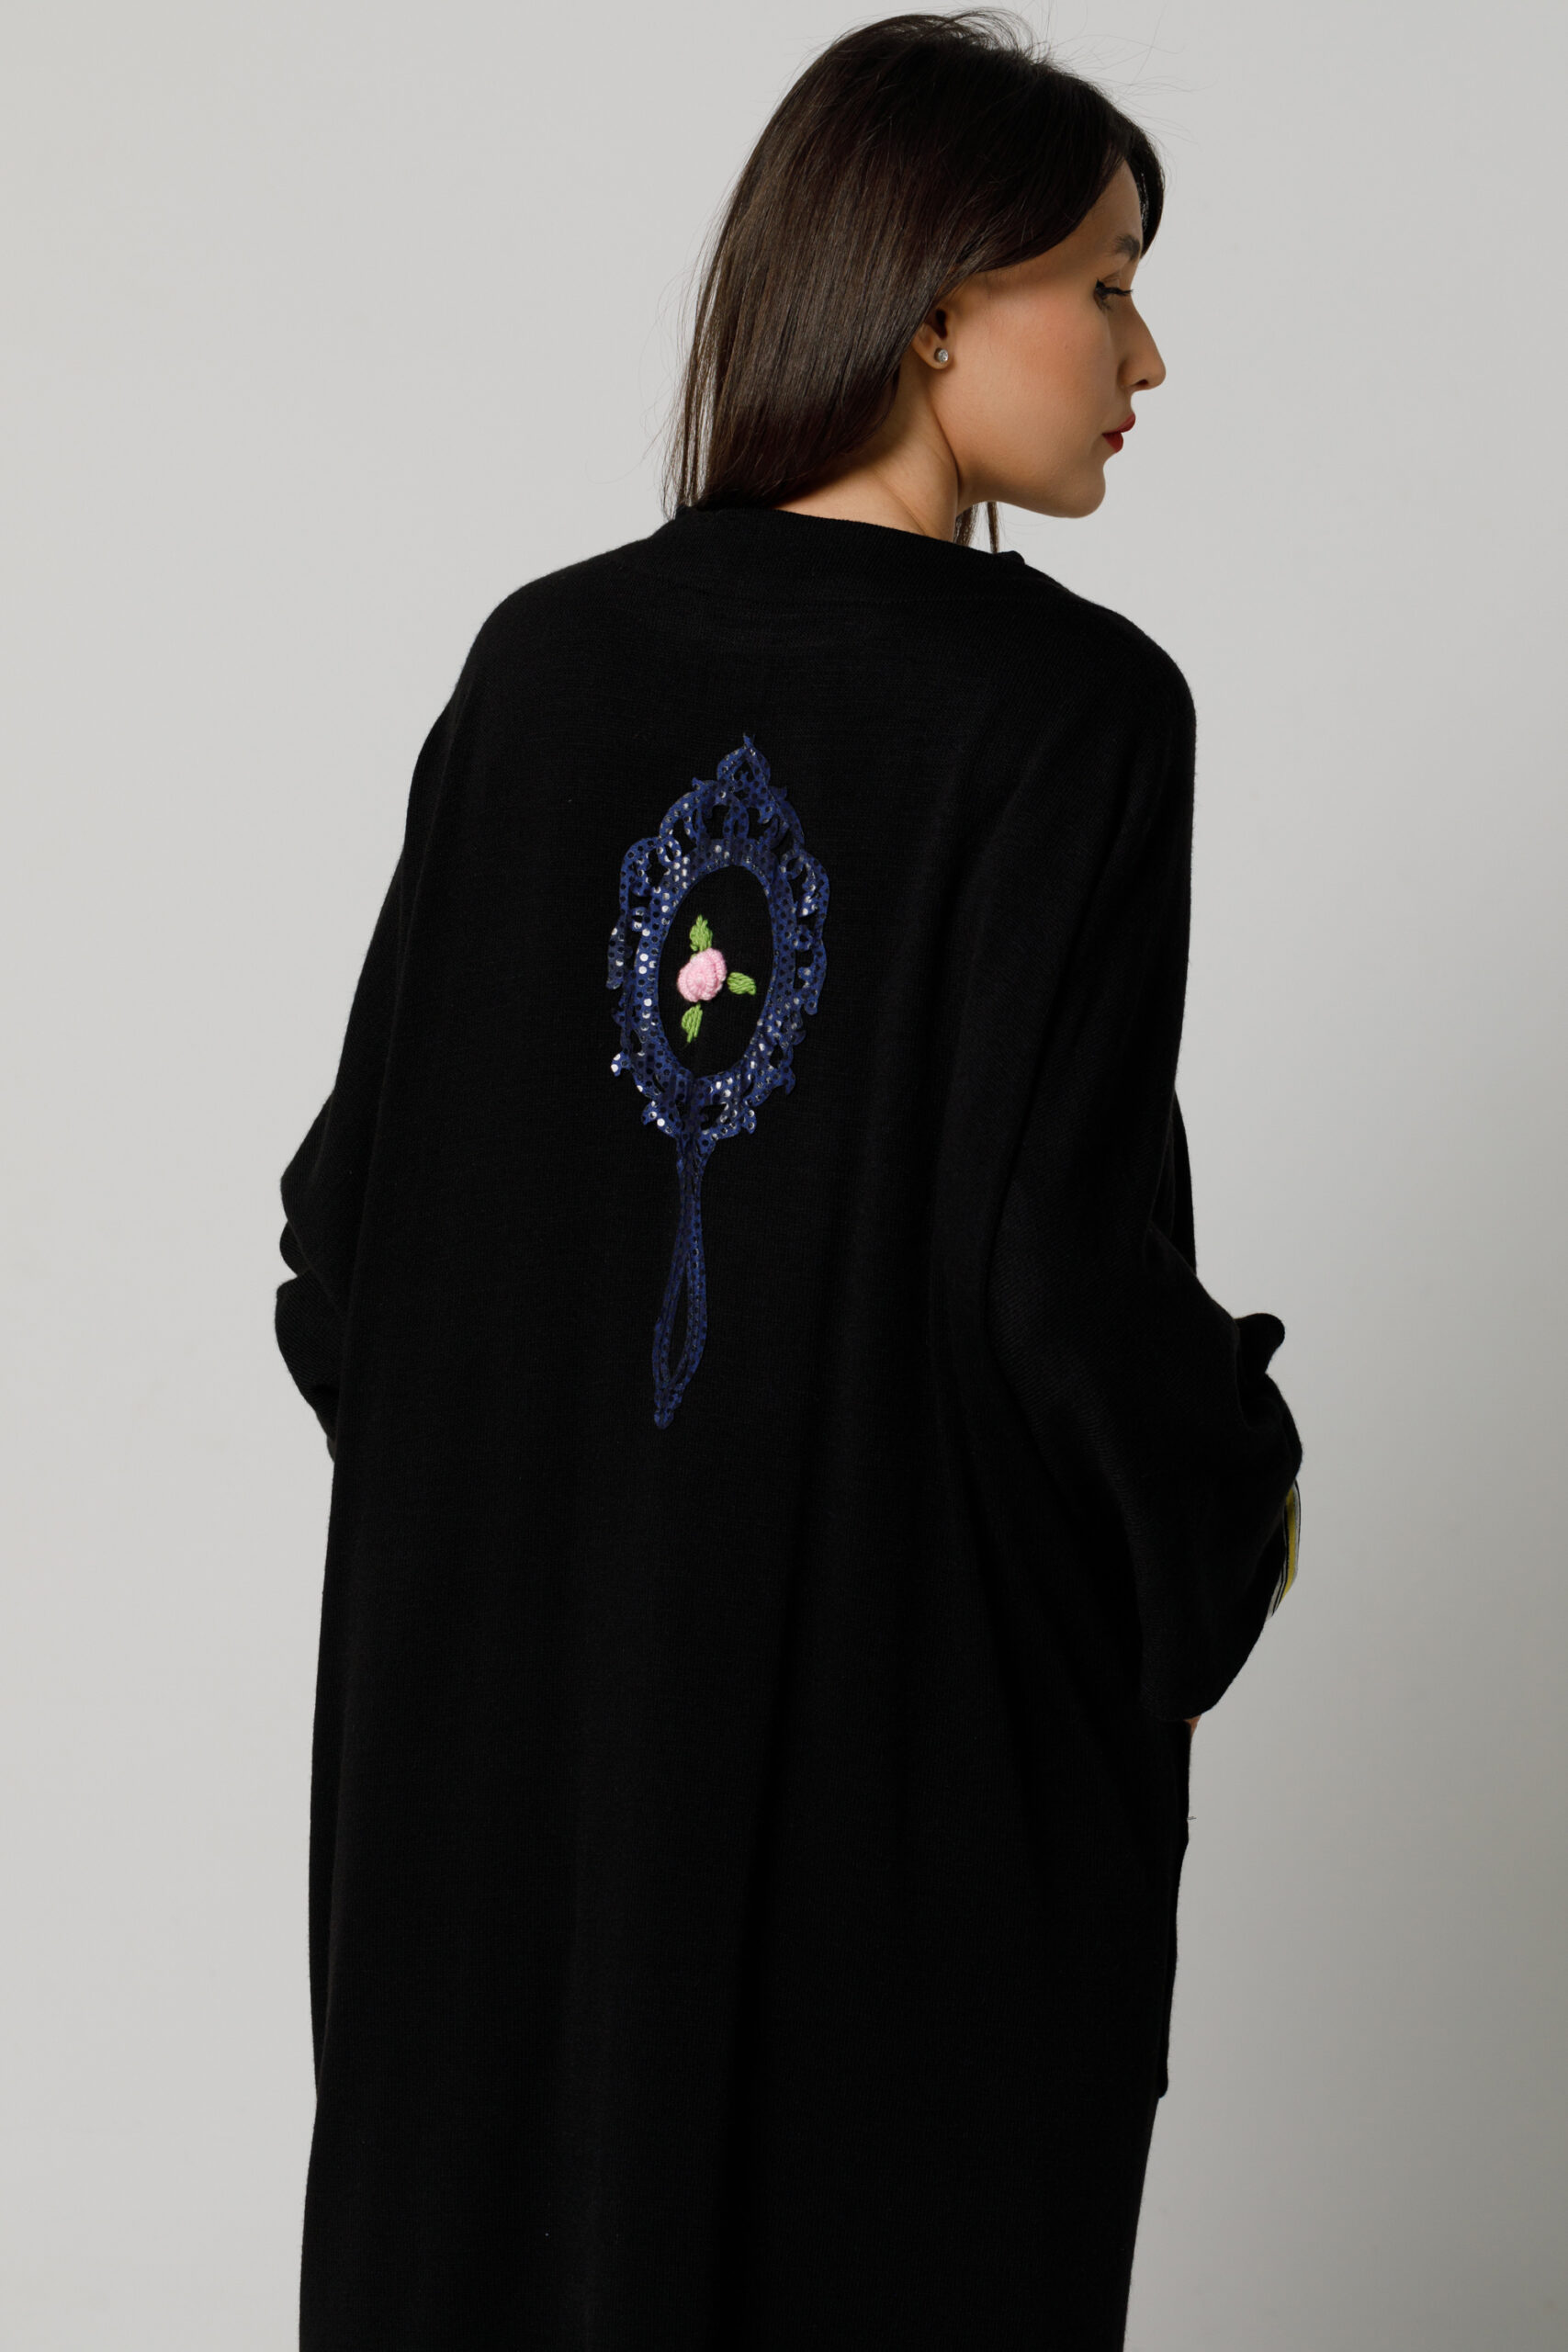 DENNY casual jersey poncho with embroidery. Natural fabrics, original design, handmade embroidery